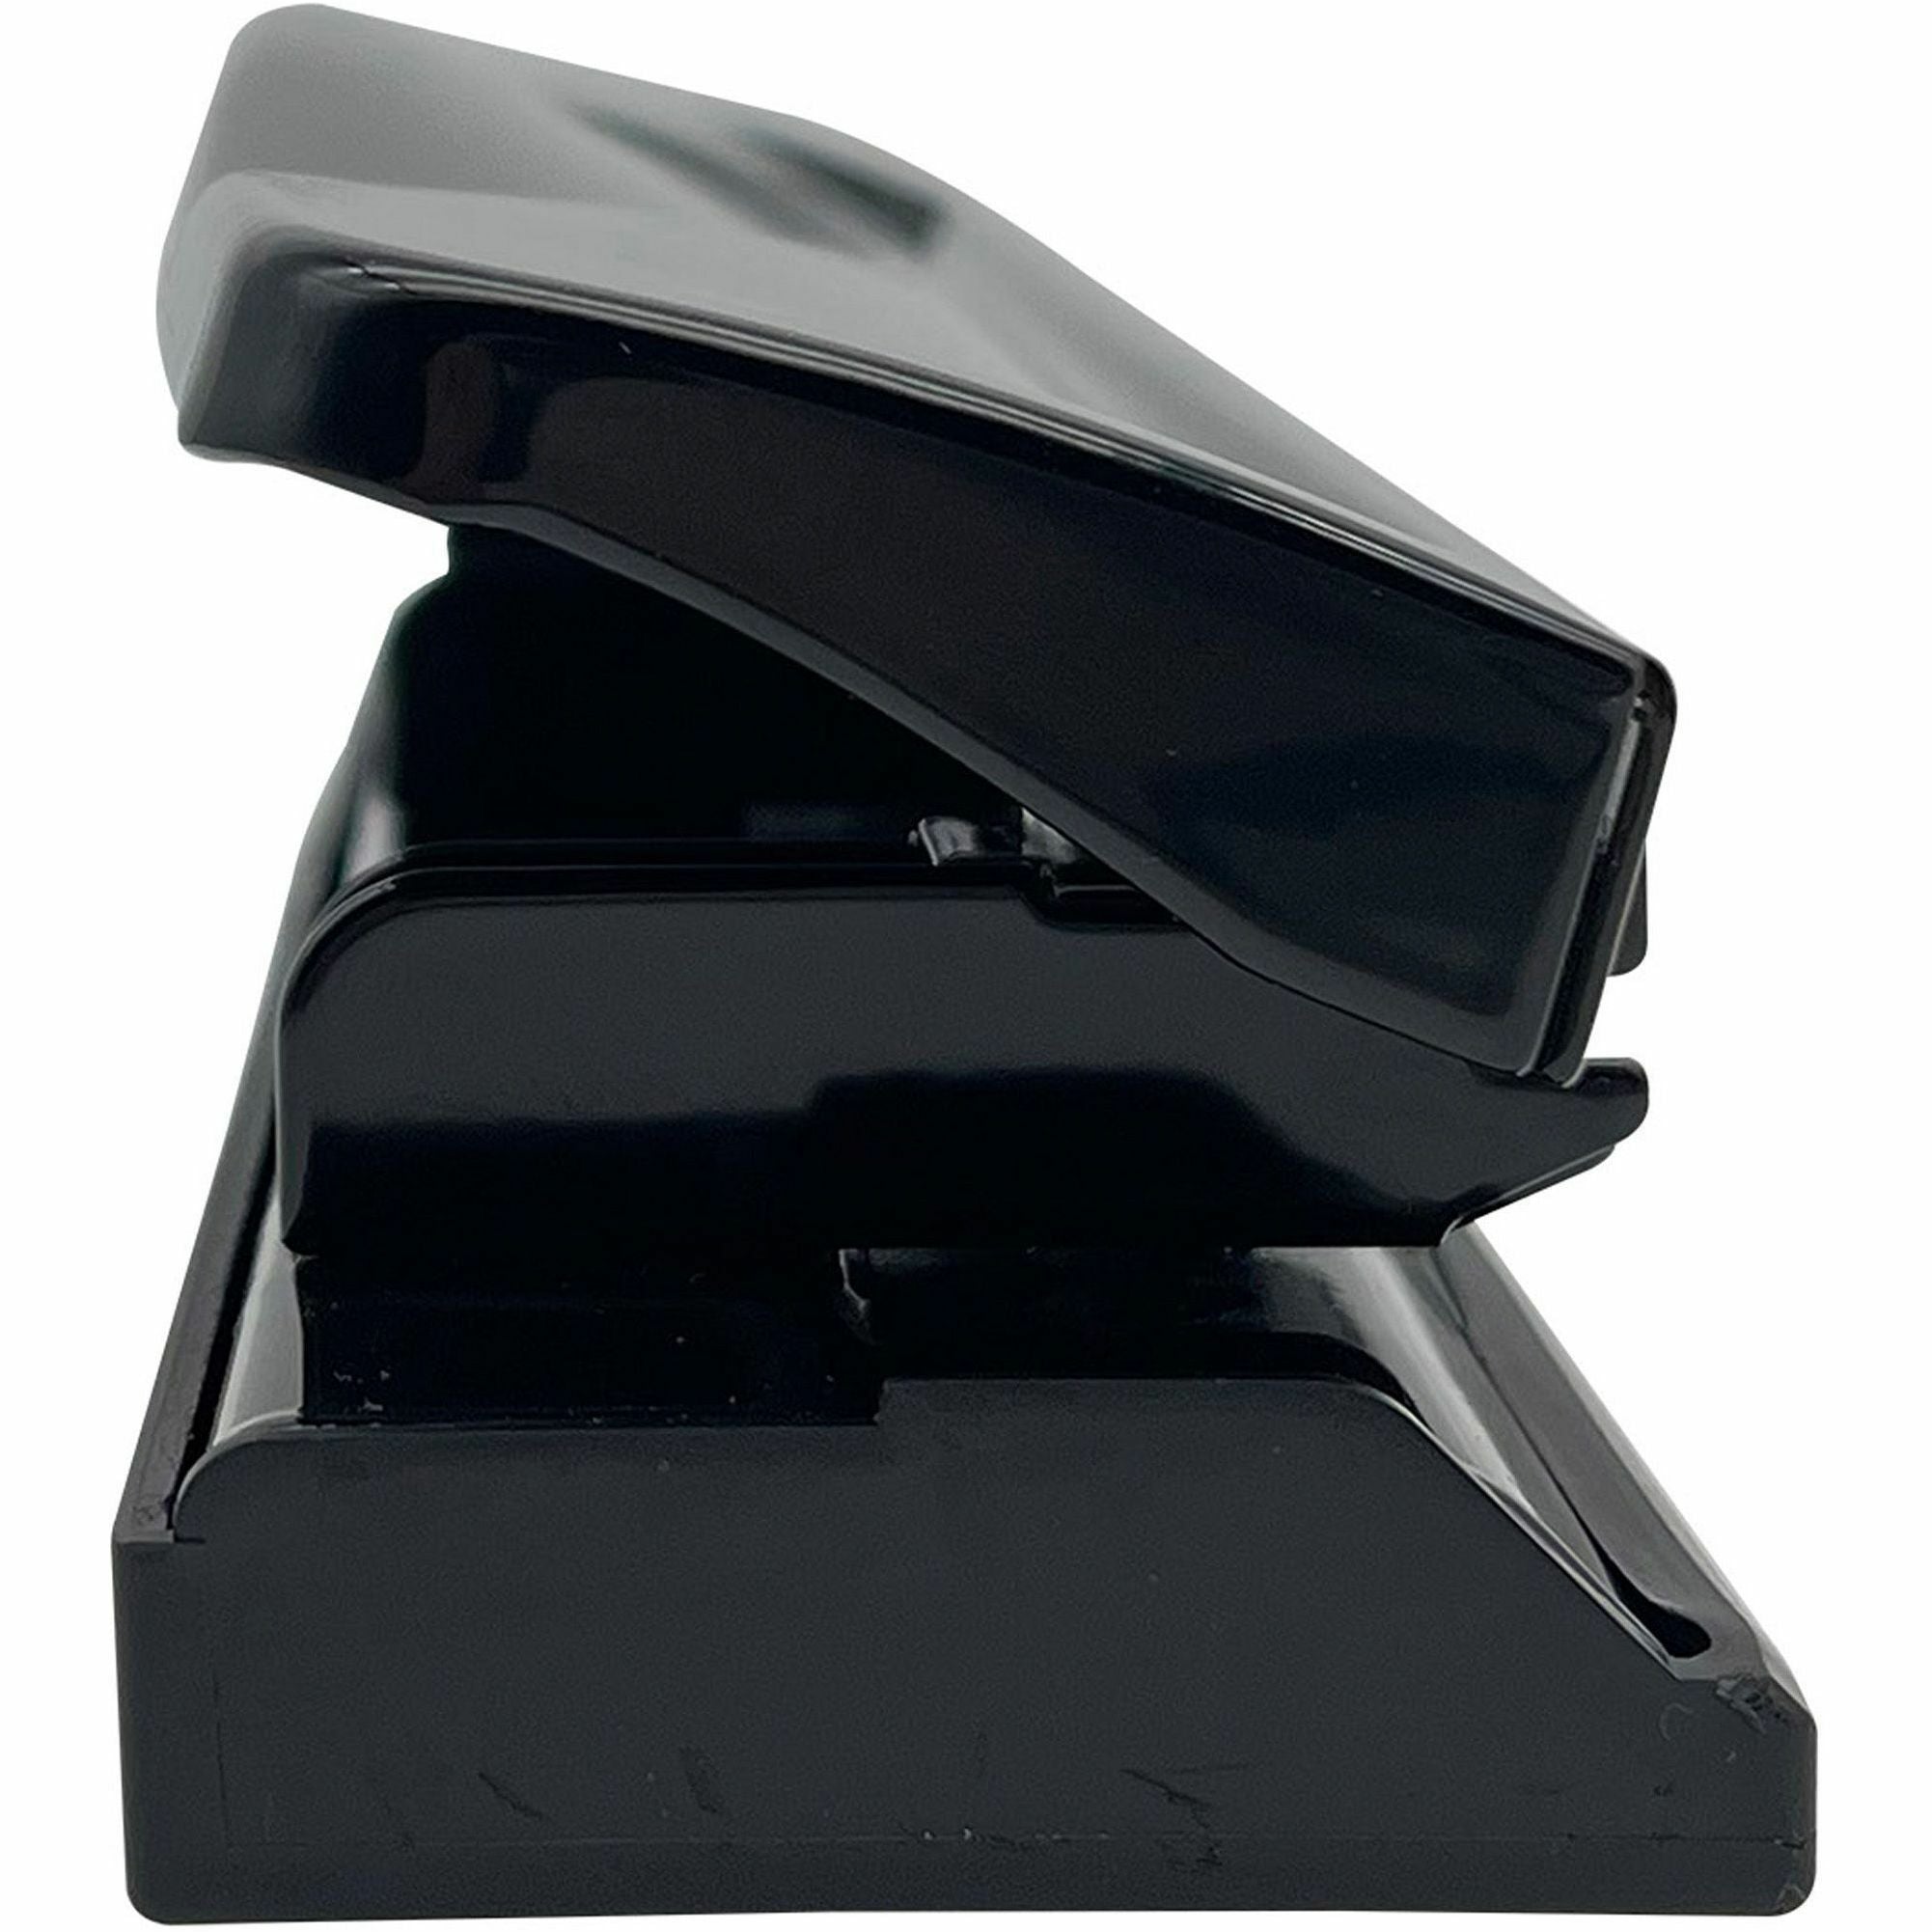 business-source-nonadjustable-3-hole-punch-10-sheet-1-4-punch-size-round-shape-black_bsn65655 - 2